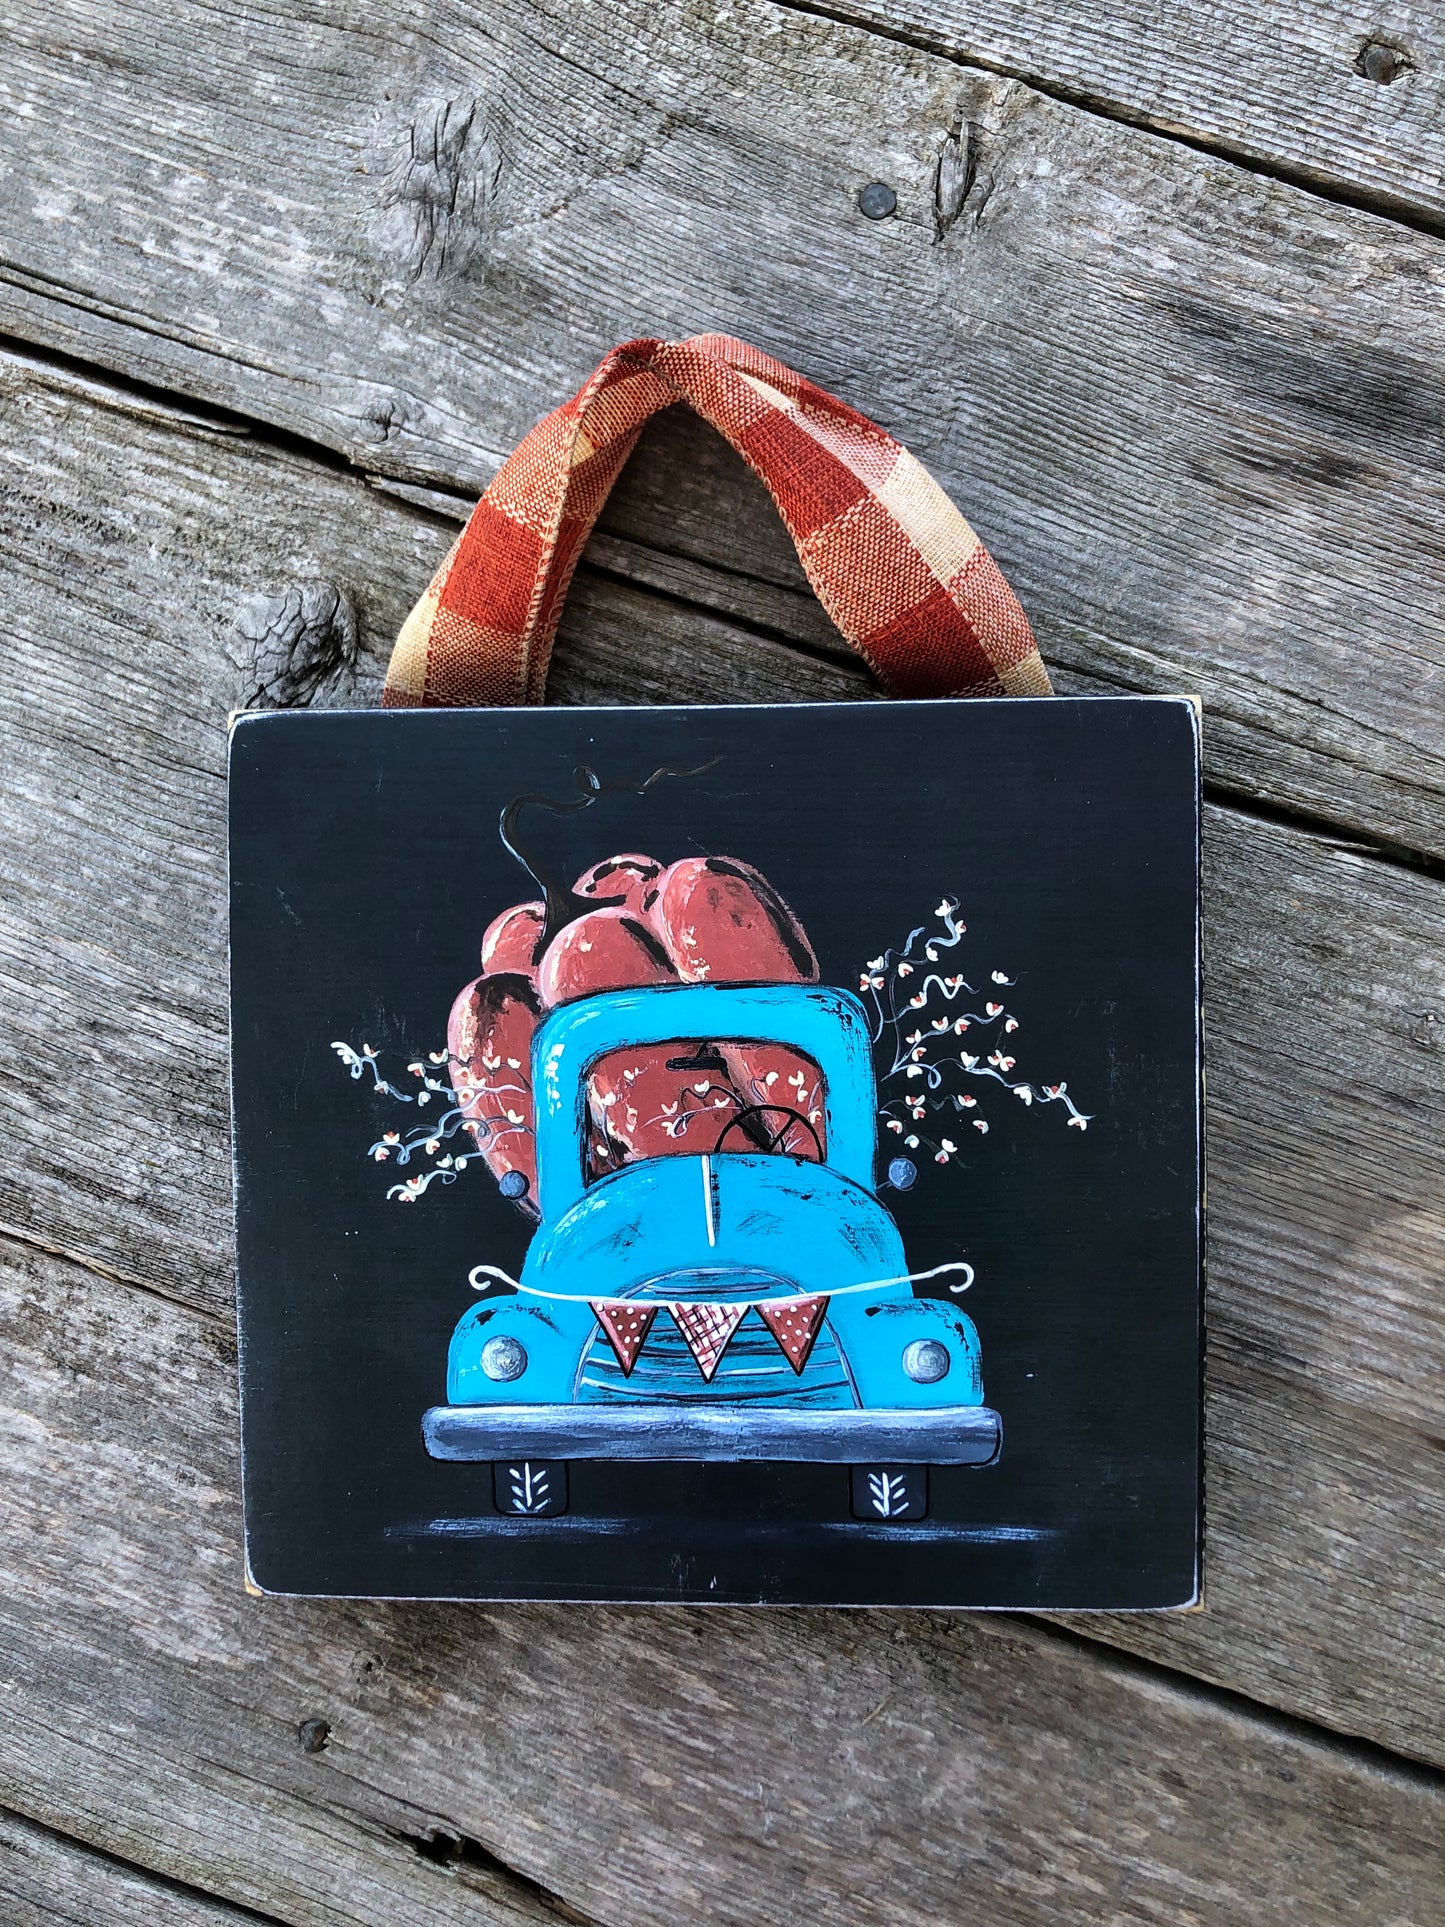 TRUCK -7.25 IN. TURQUOISE TRUCK WITH PUMPKIN PRINT - WOOD SIGN